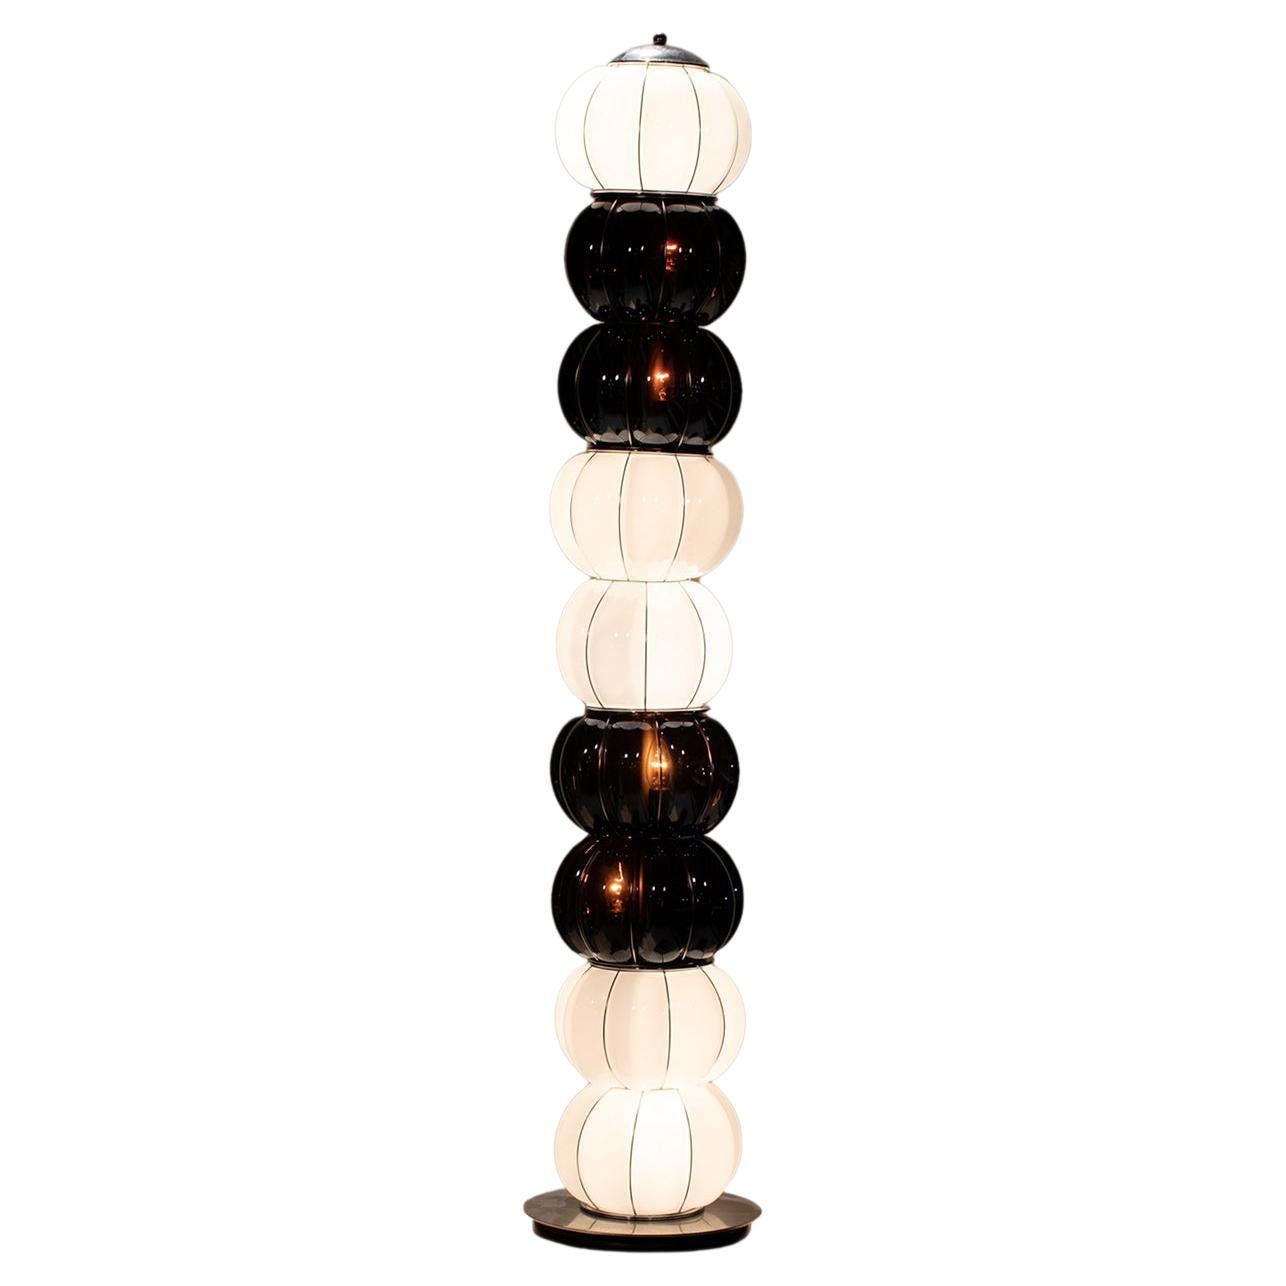 Nuvola Black and White Floor Lamp